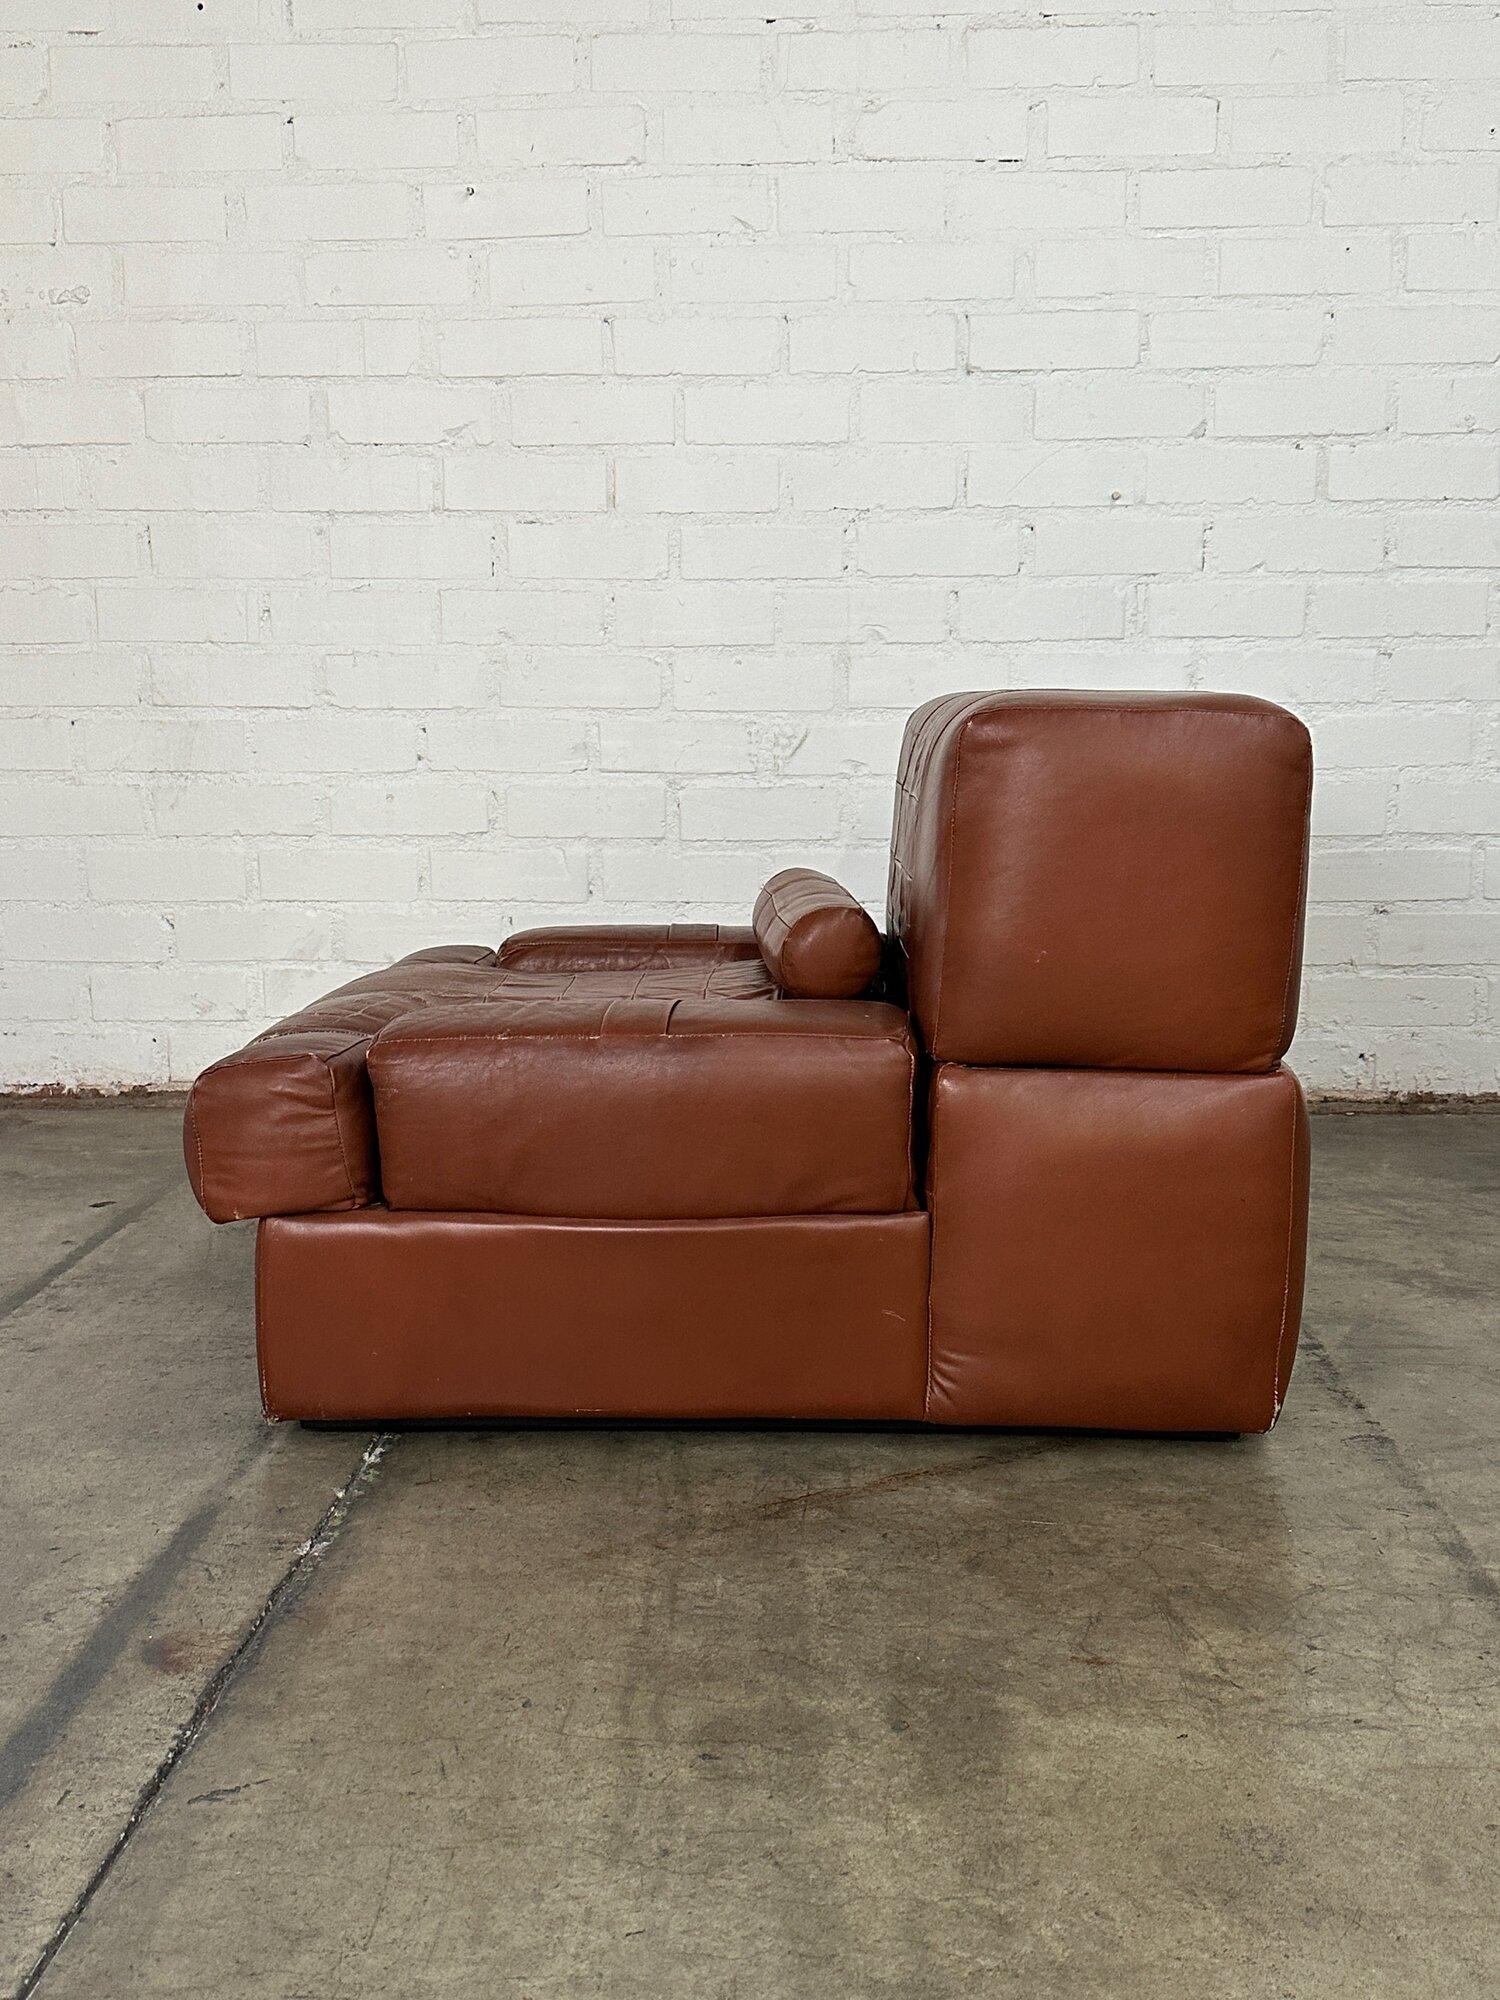 Ajustable Percival Lafer lounge chair and ottoman In Good Condition For Sale In Los Angeles, CA